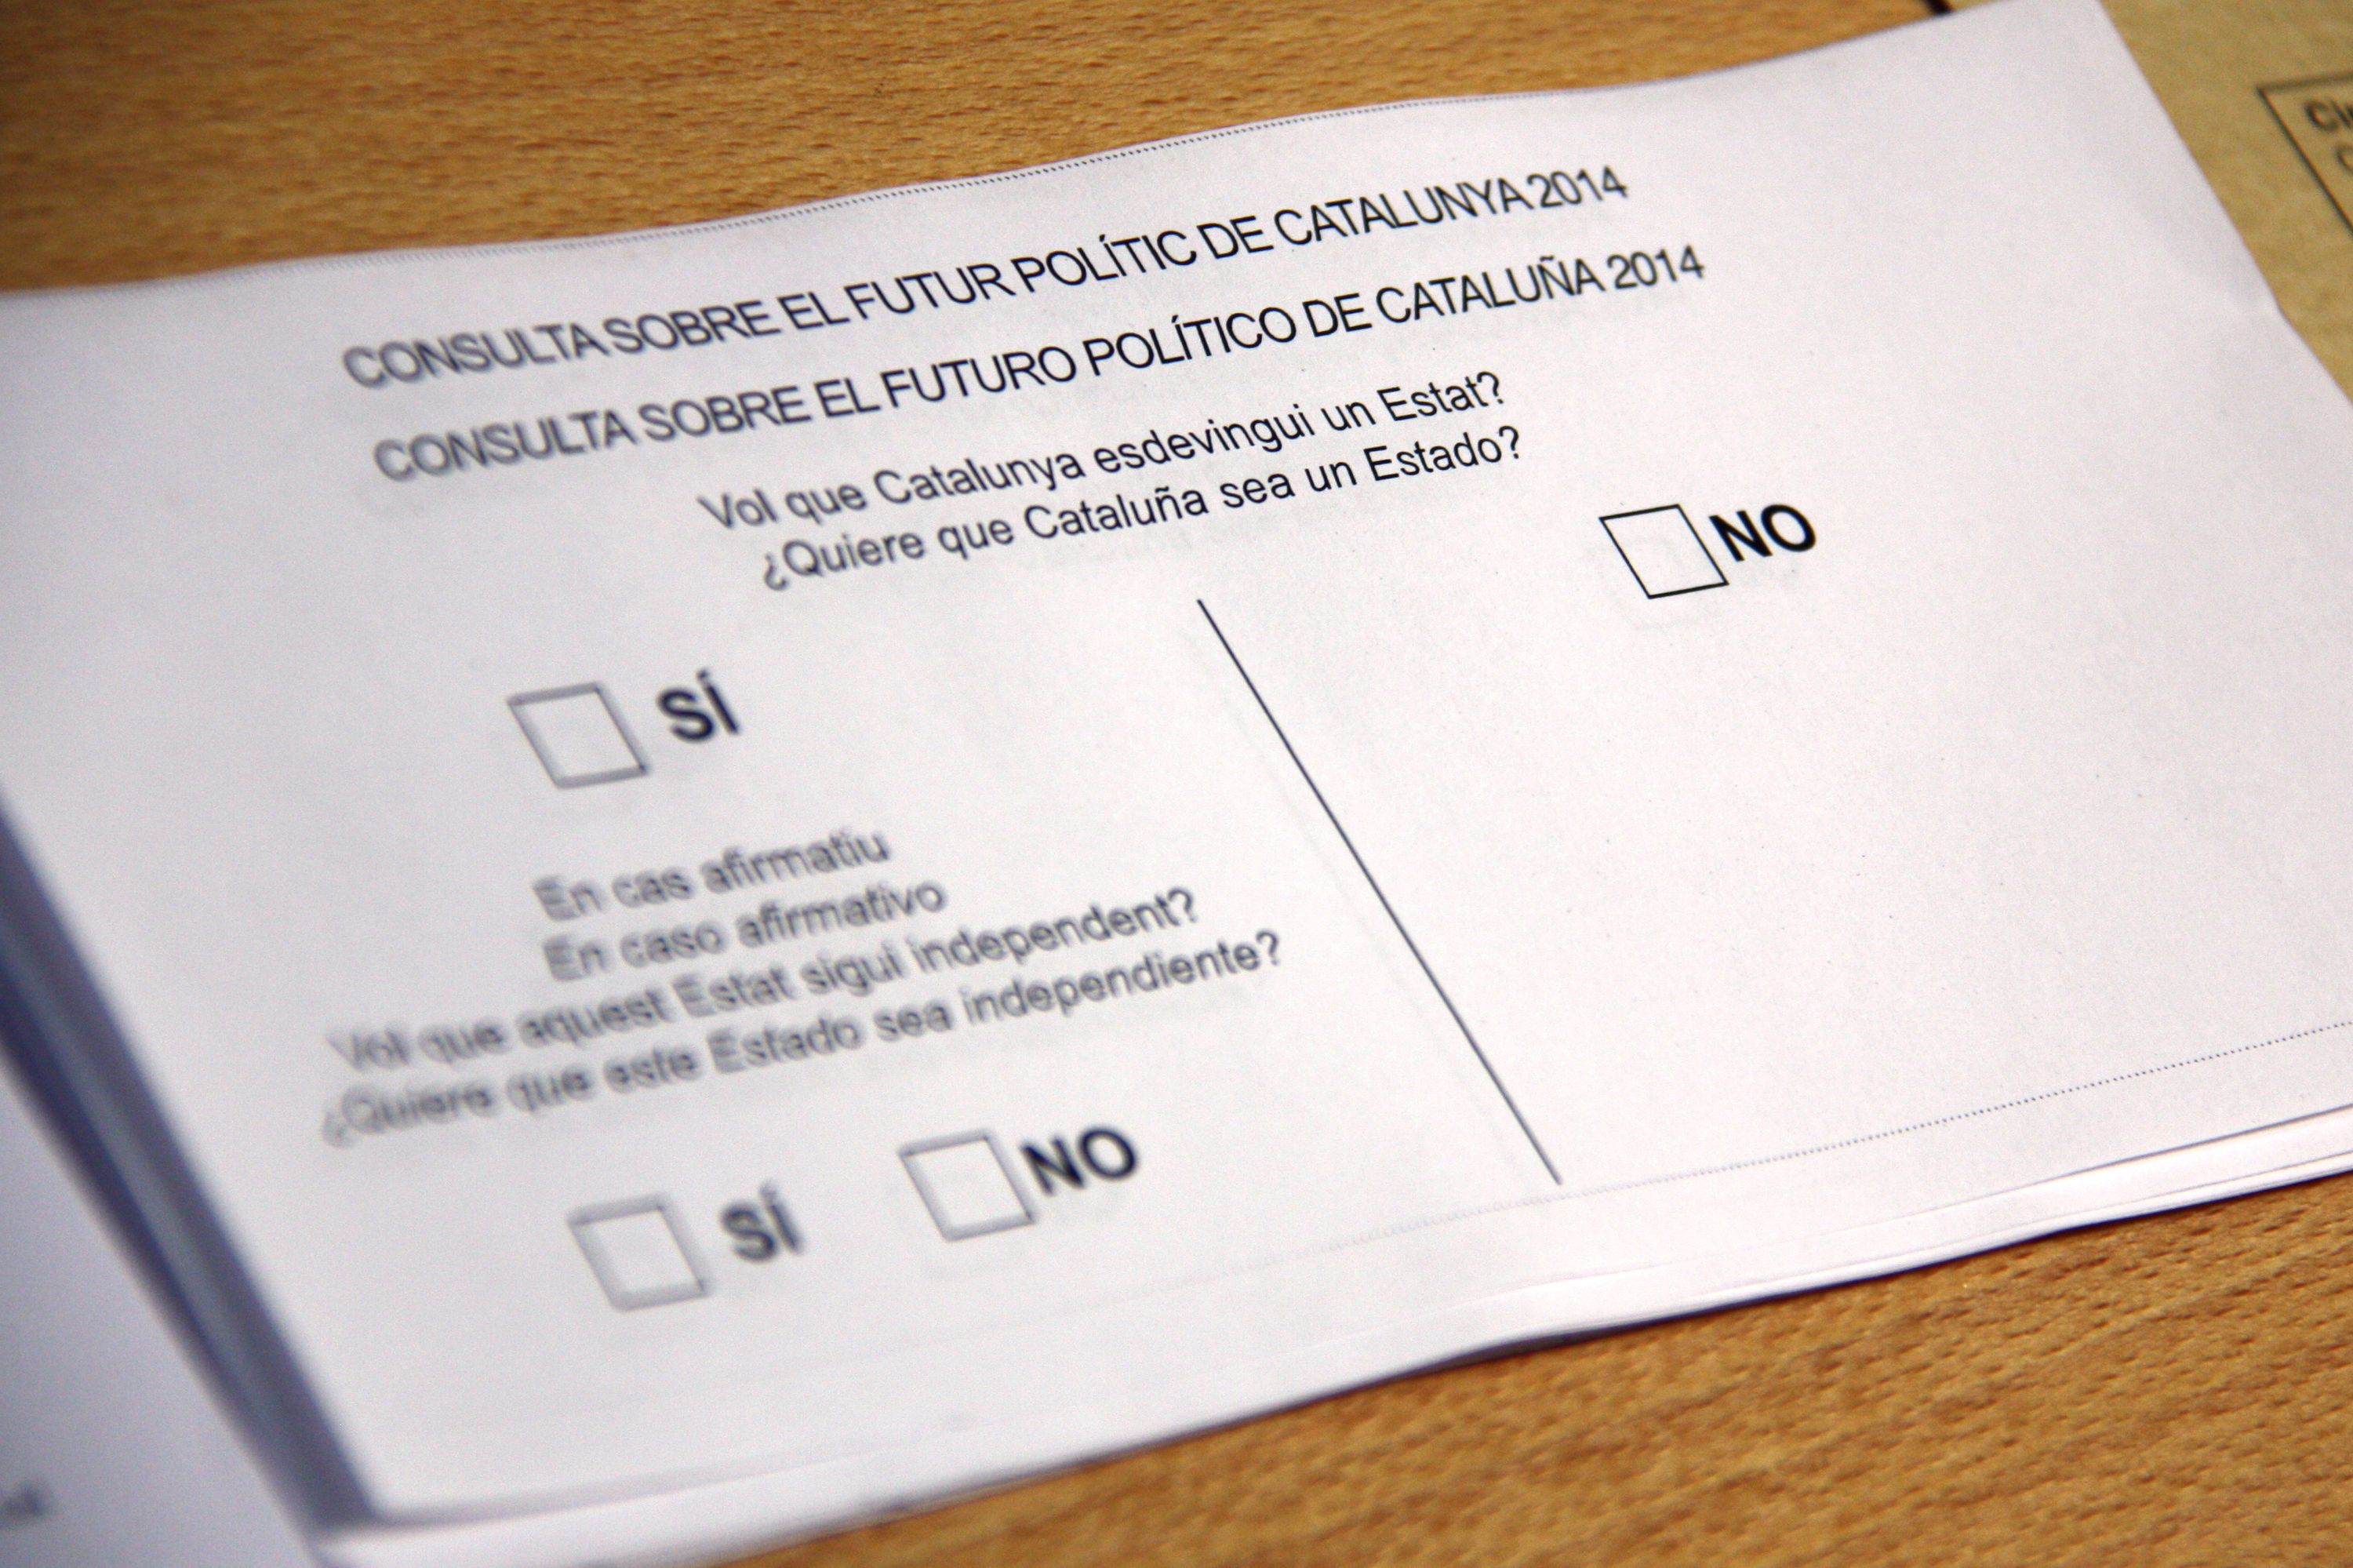 Israeli disinformation expert launched cyberattack against 2014 Catalan independence vote